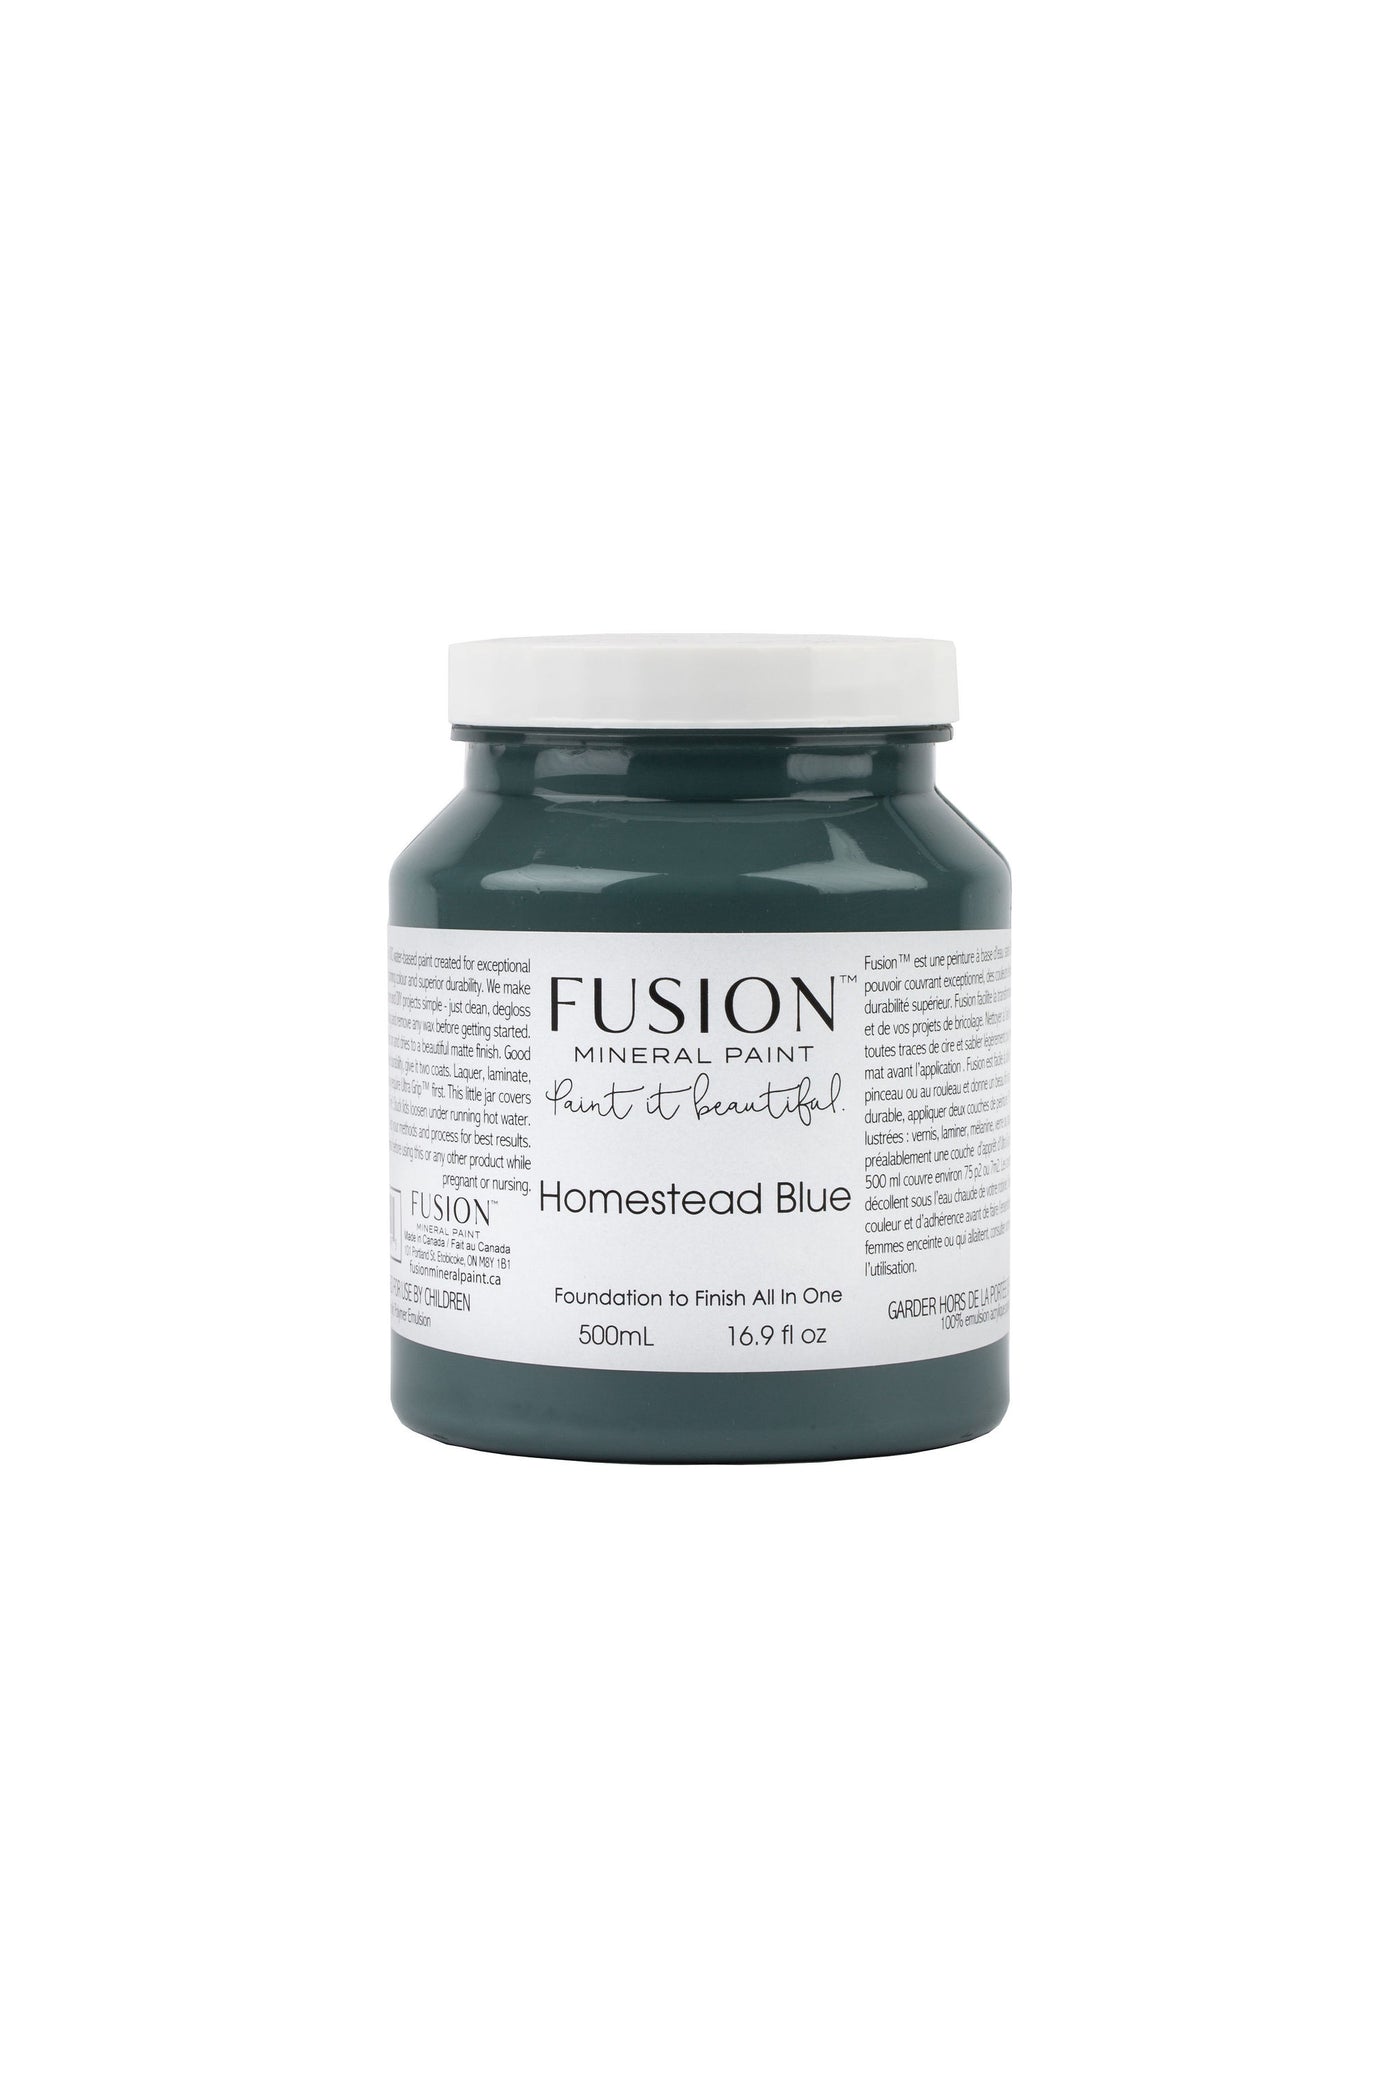 HOMESTEAD BLUE - FUSION MINERAL PAINT